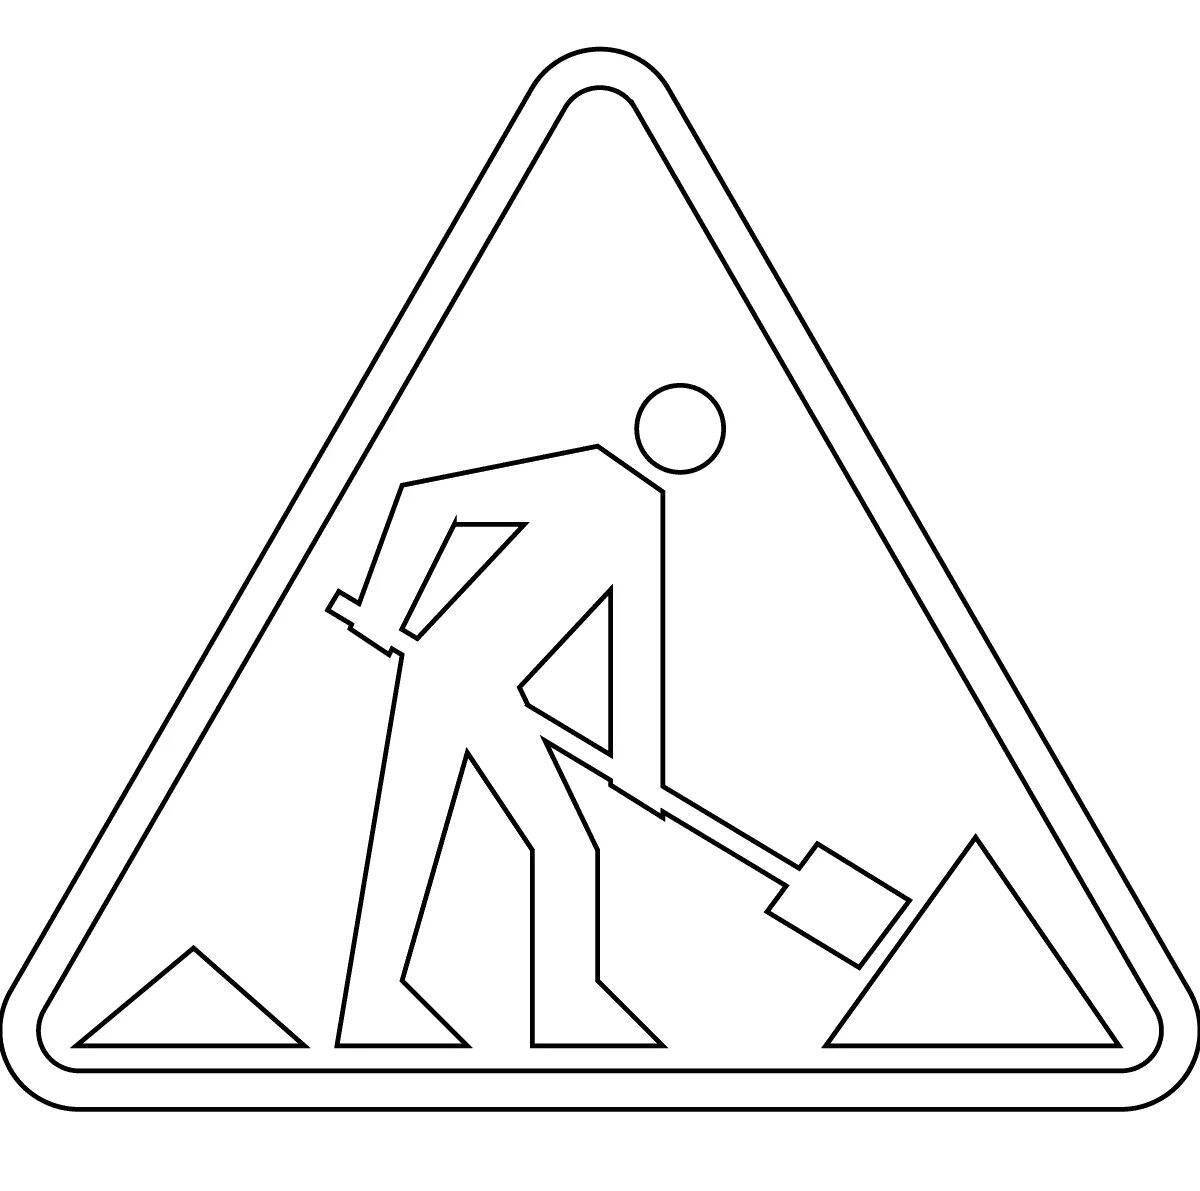 Coloring page fat road sign